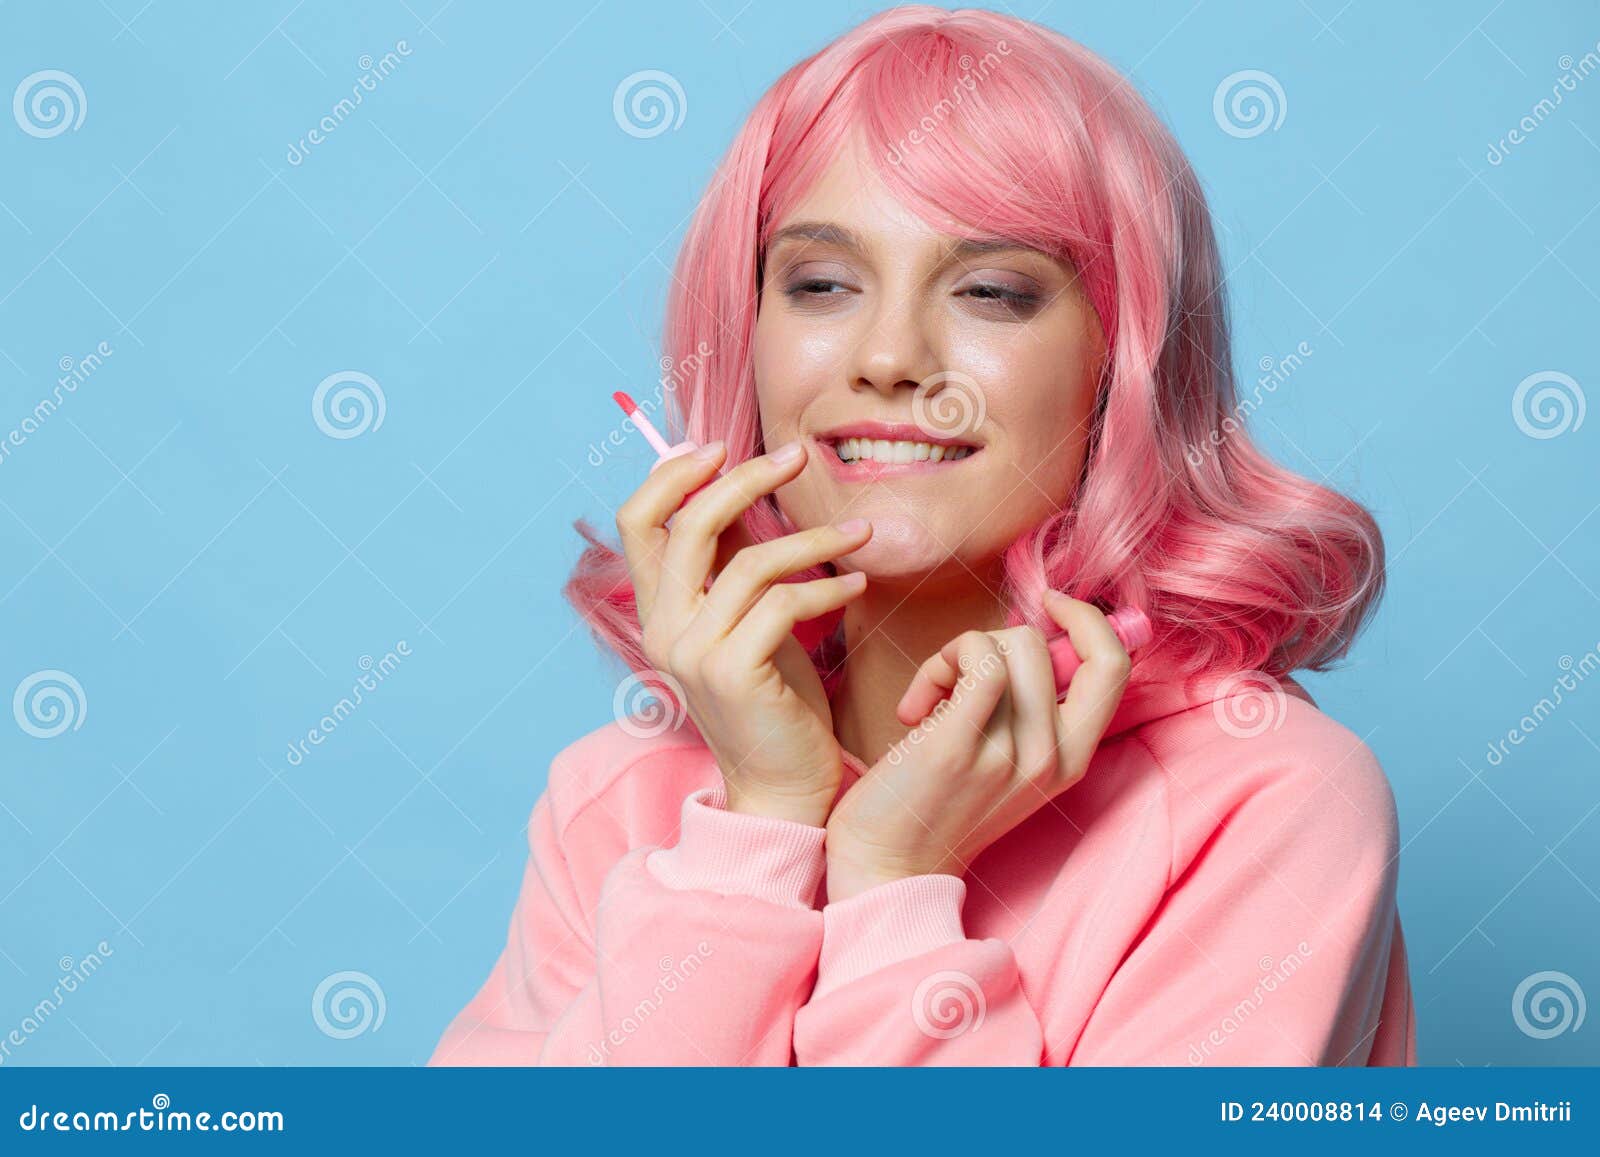 3. Stunning blue-eyed woman with pink hair - wide 10